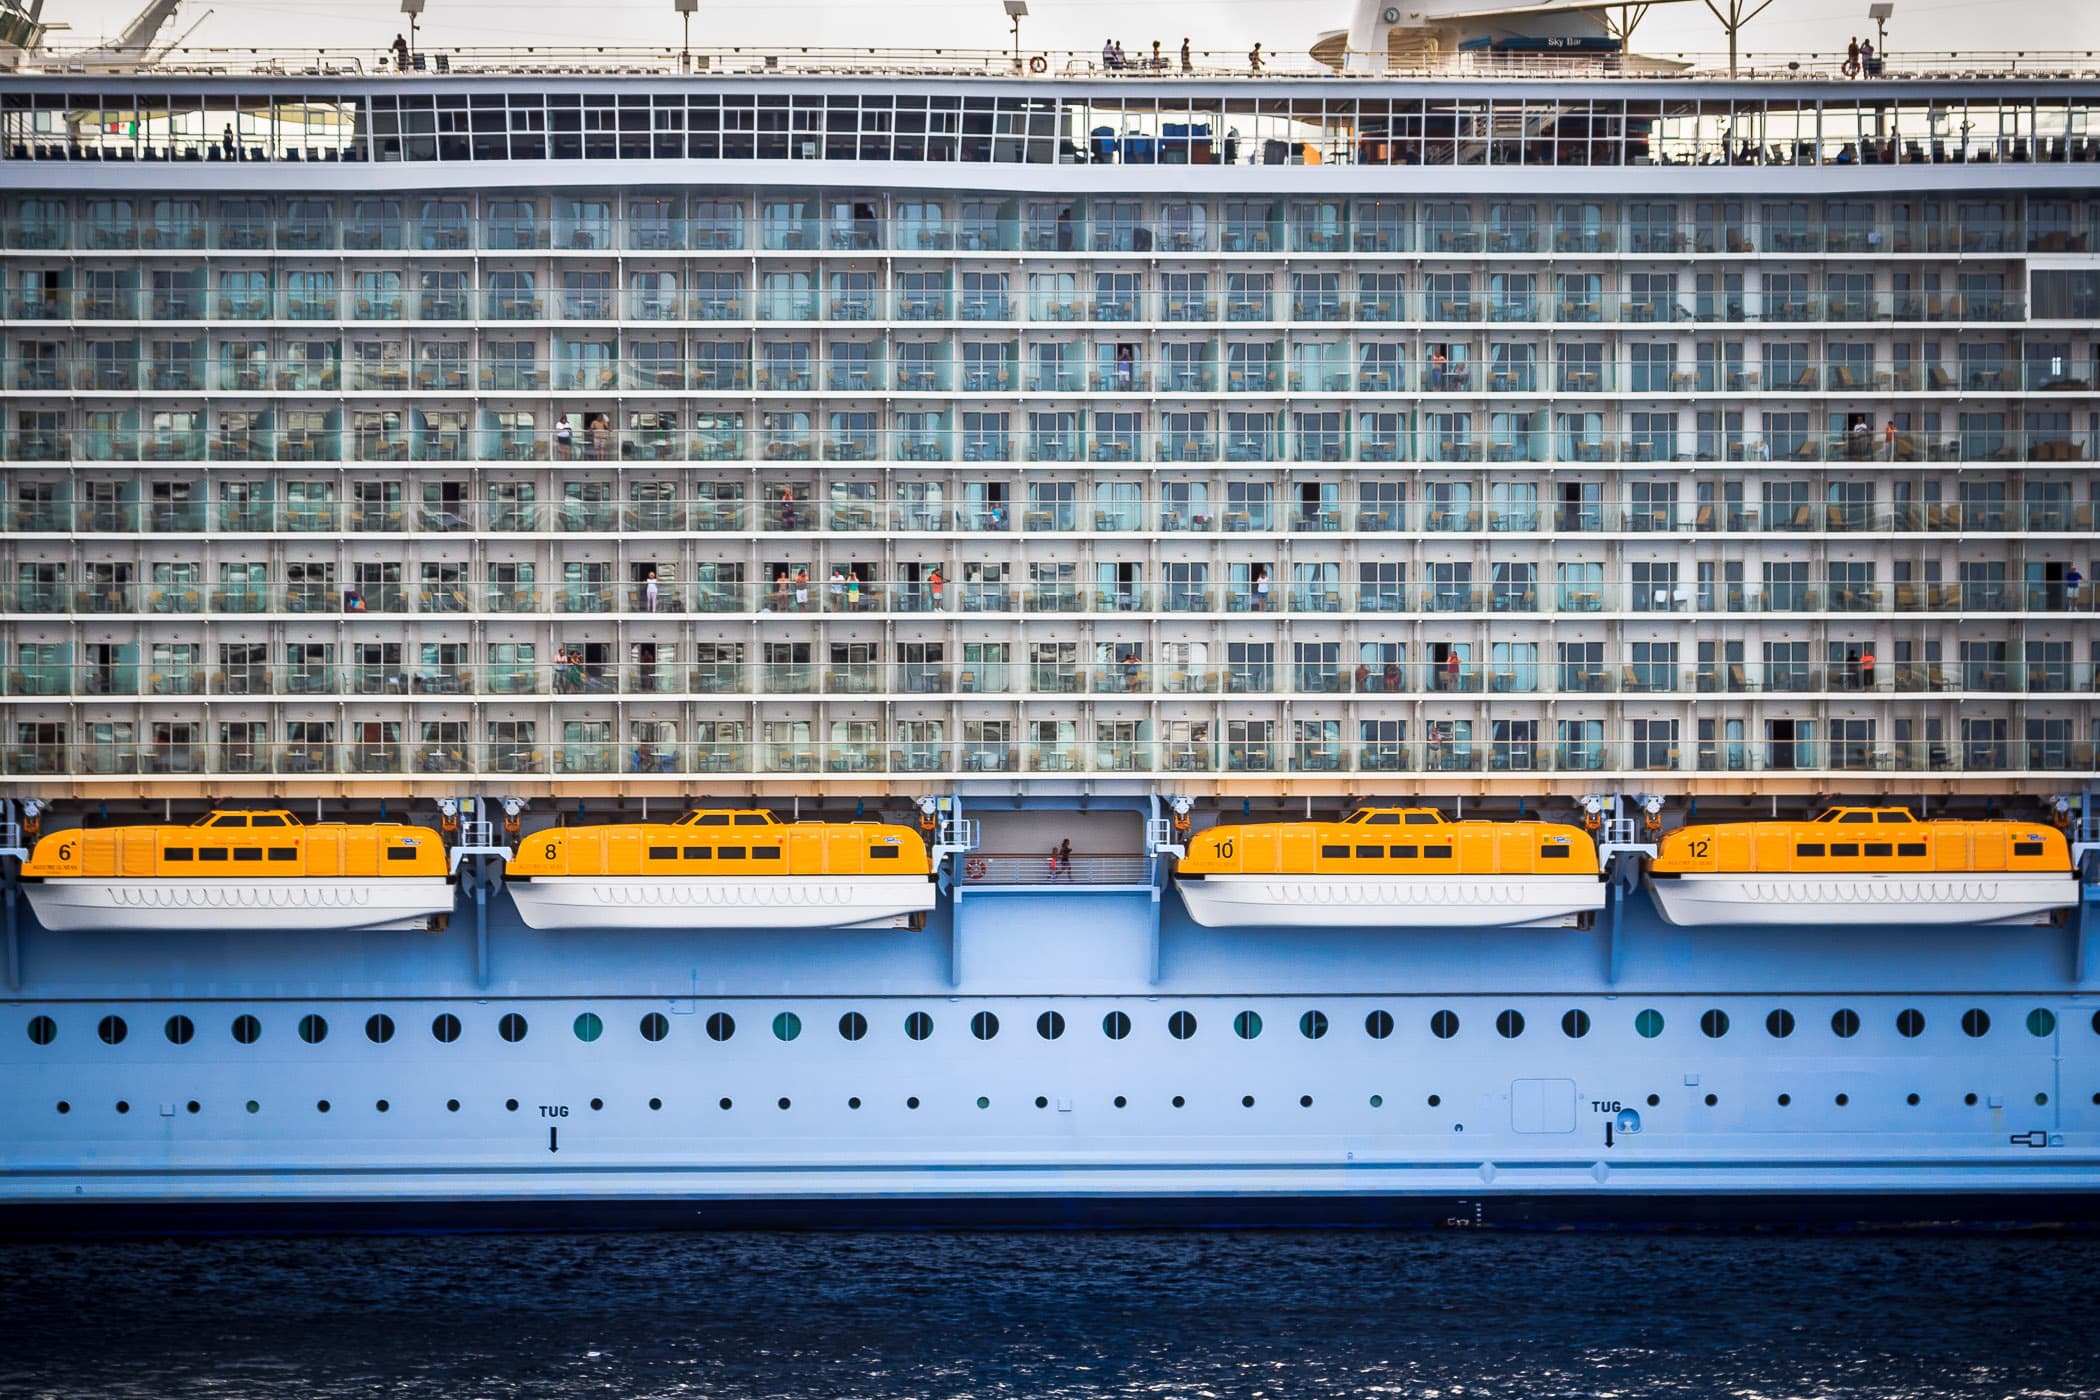 Detail of Royal Caribbean's Allure of the Seas—the largest passenger ship ever built—while docked in Cozumel, Mexico.